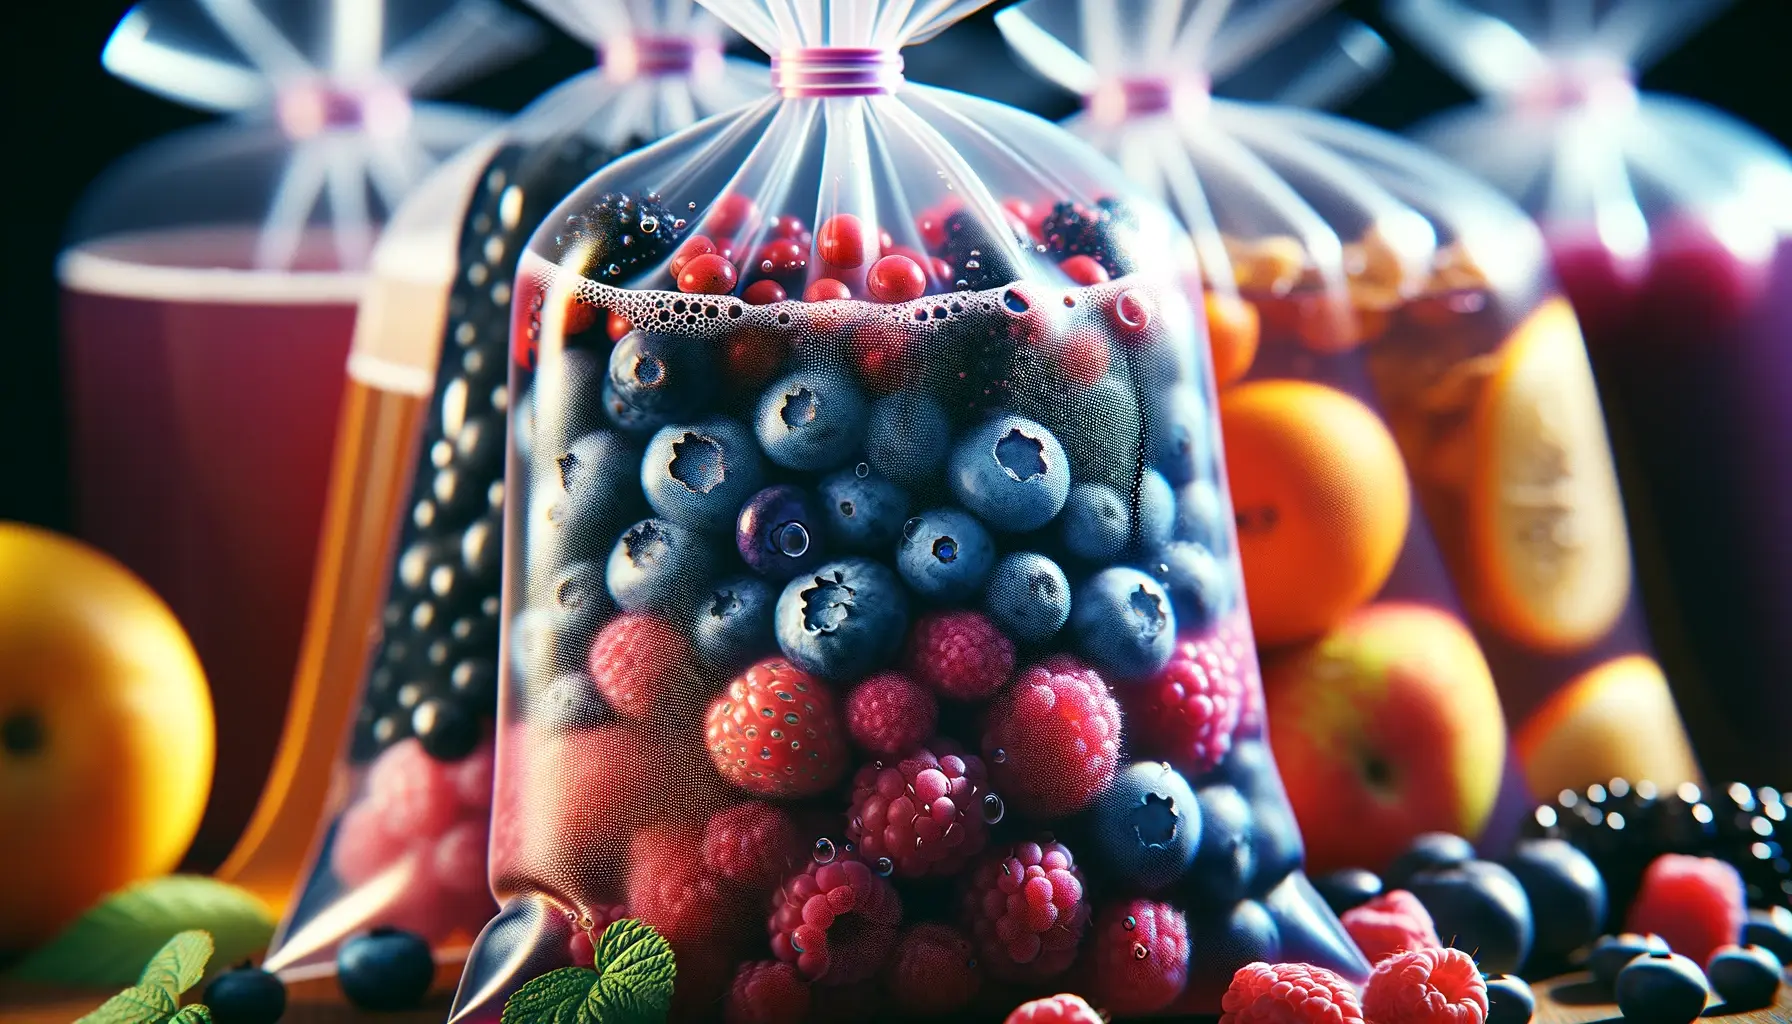 Close-up of various fruits and berries, such as blueberries and raspberries, inside vacuum-sealed bags showing signs of fermentation.